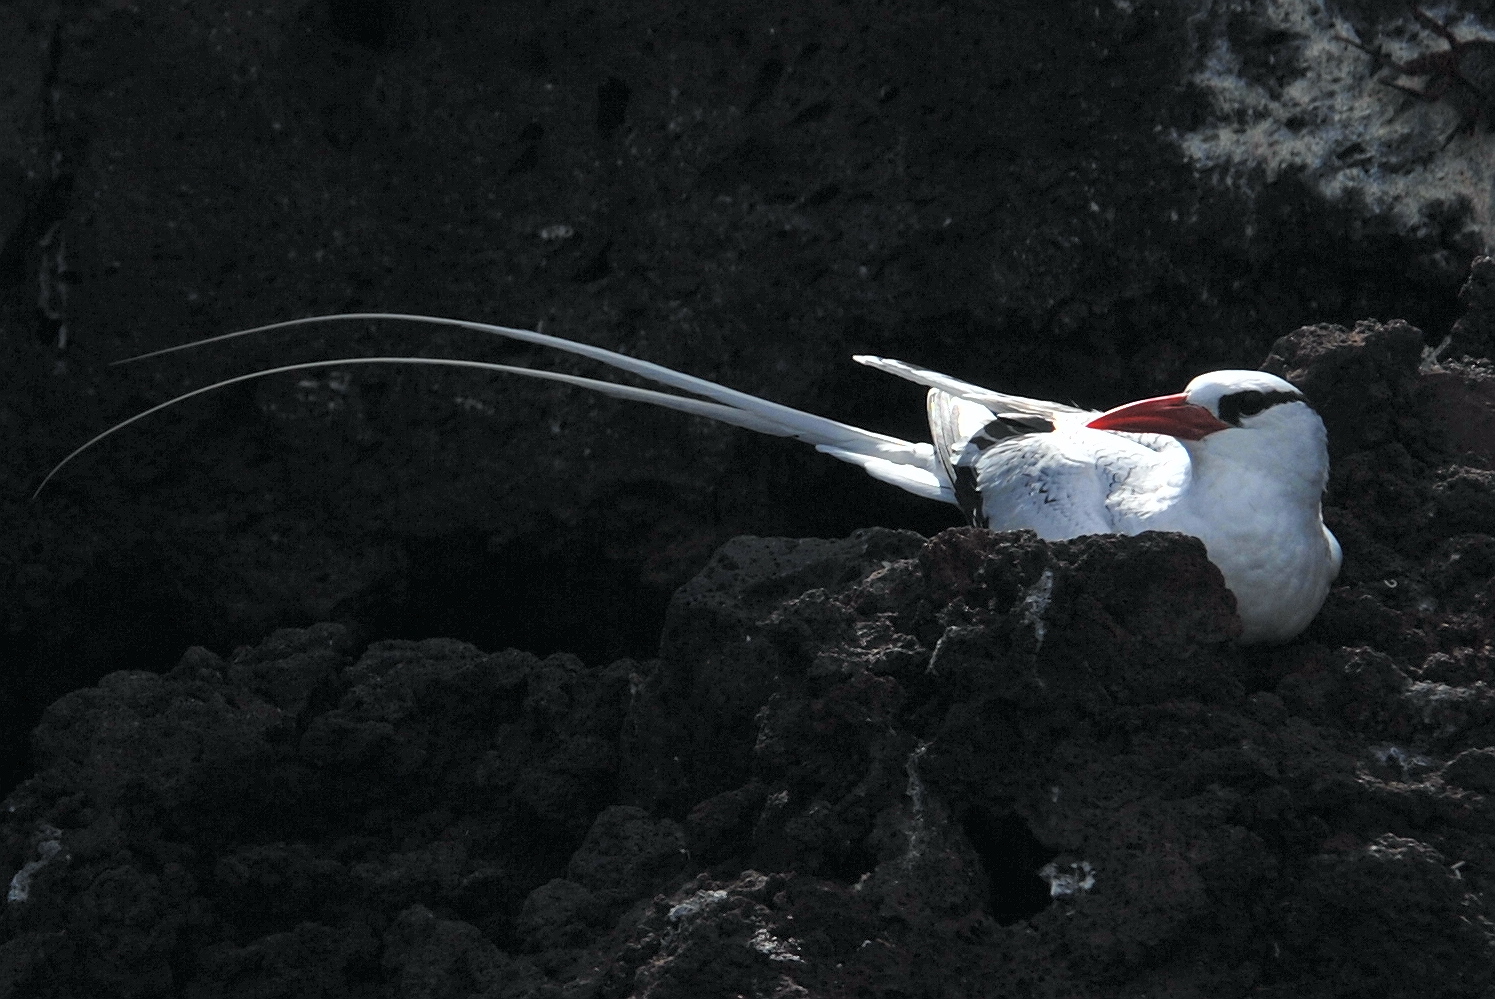 Click picture to see more Red-billed Tropicbirds.